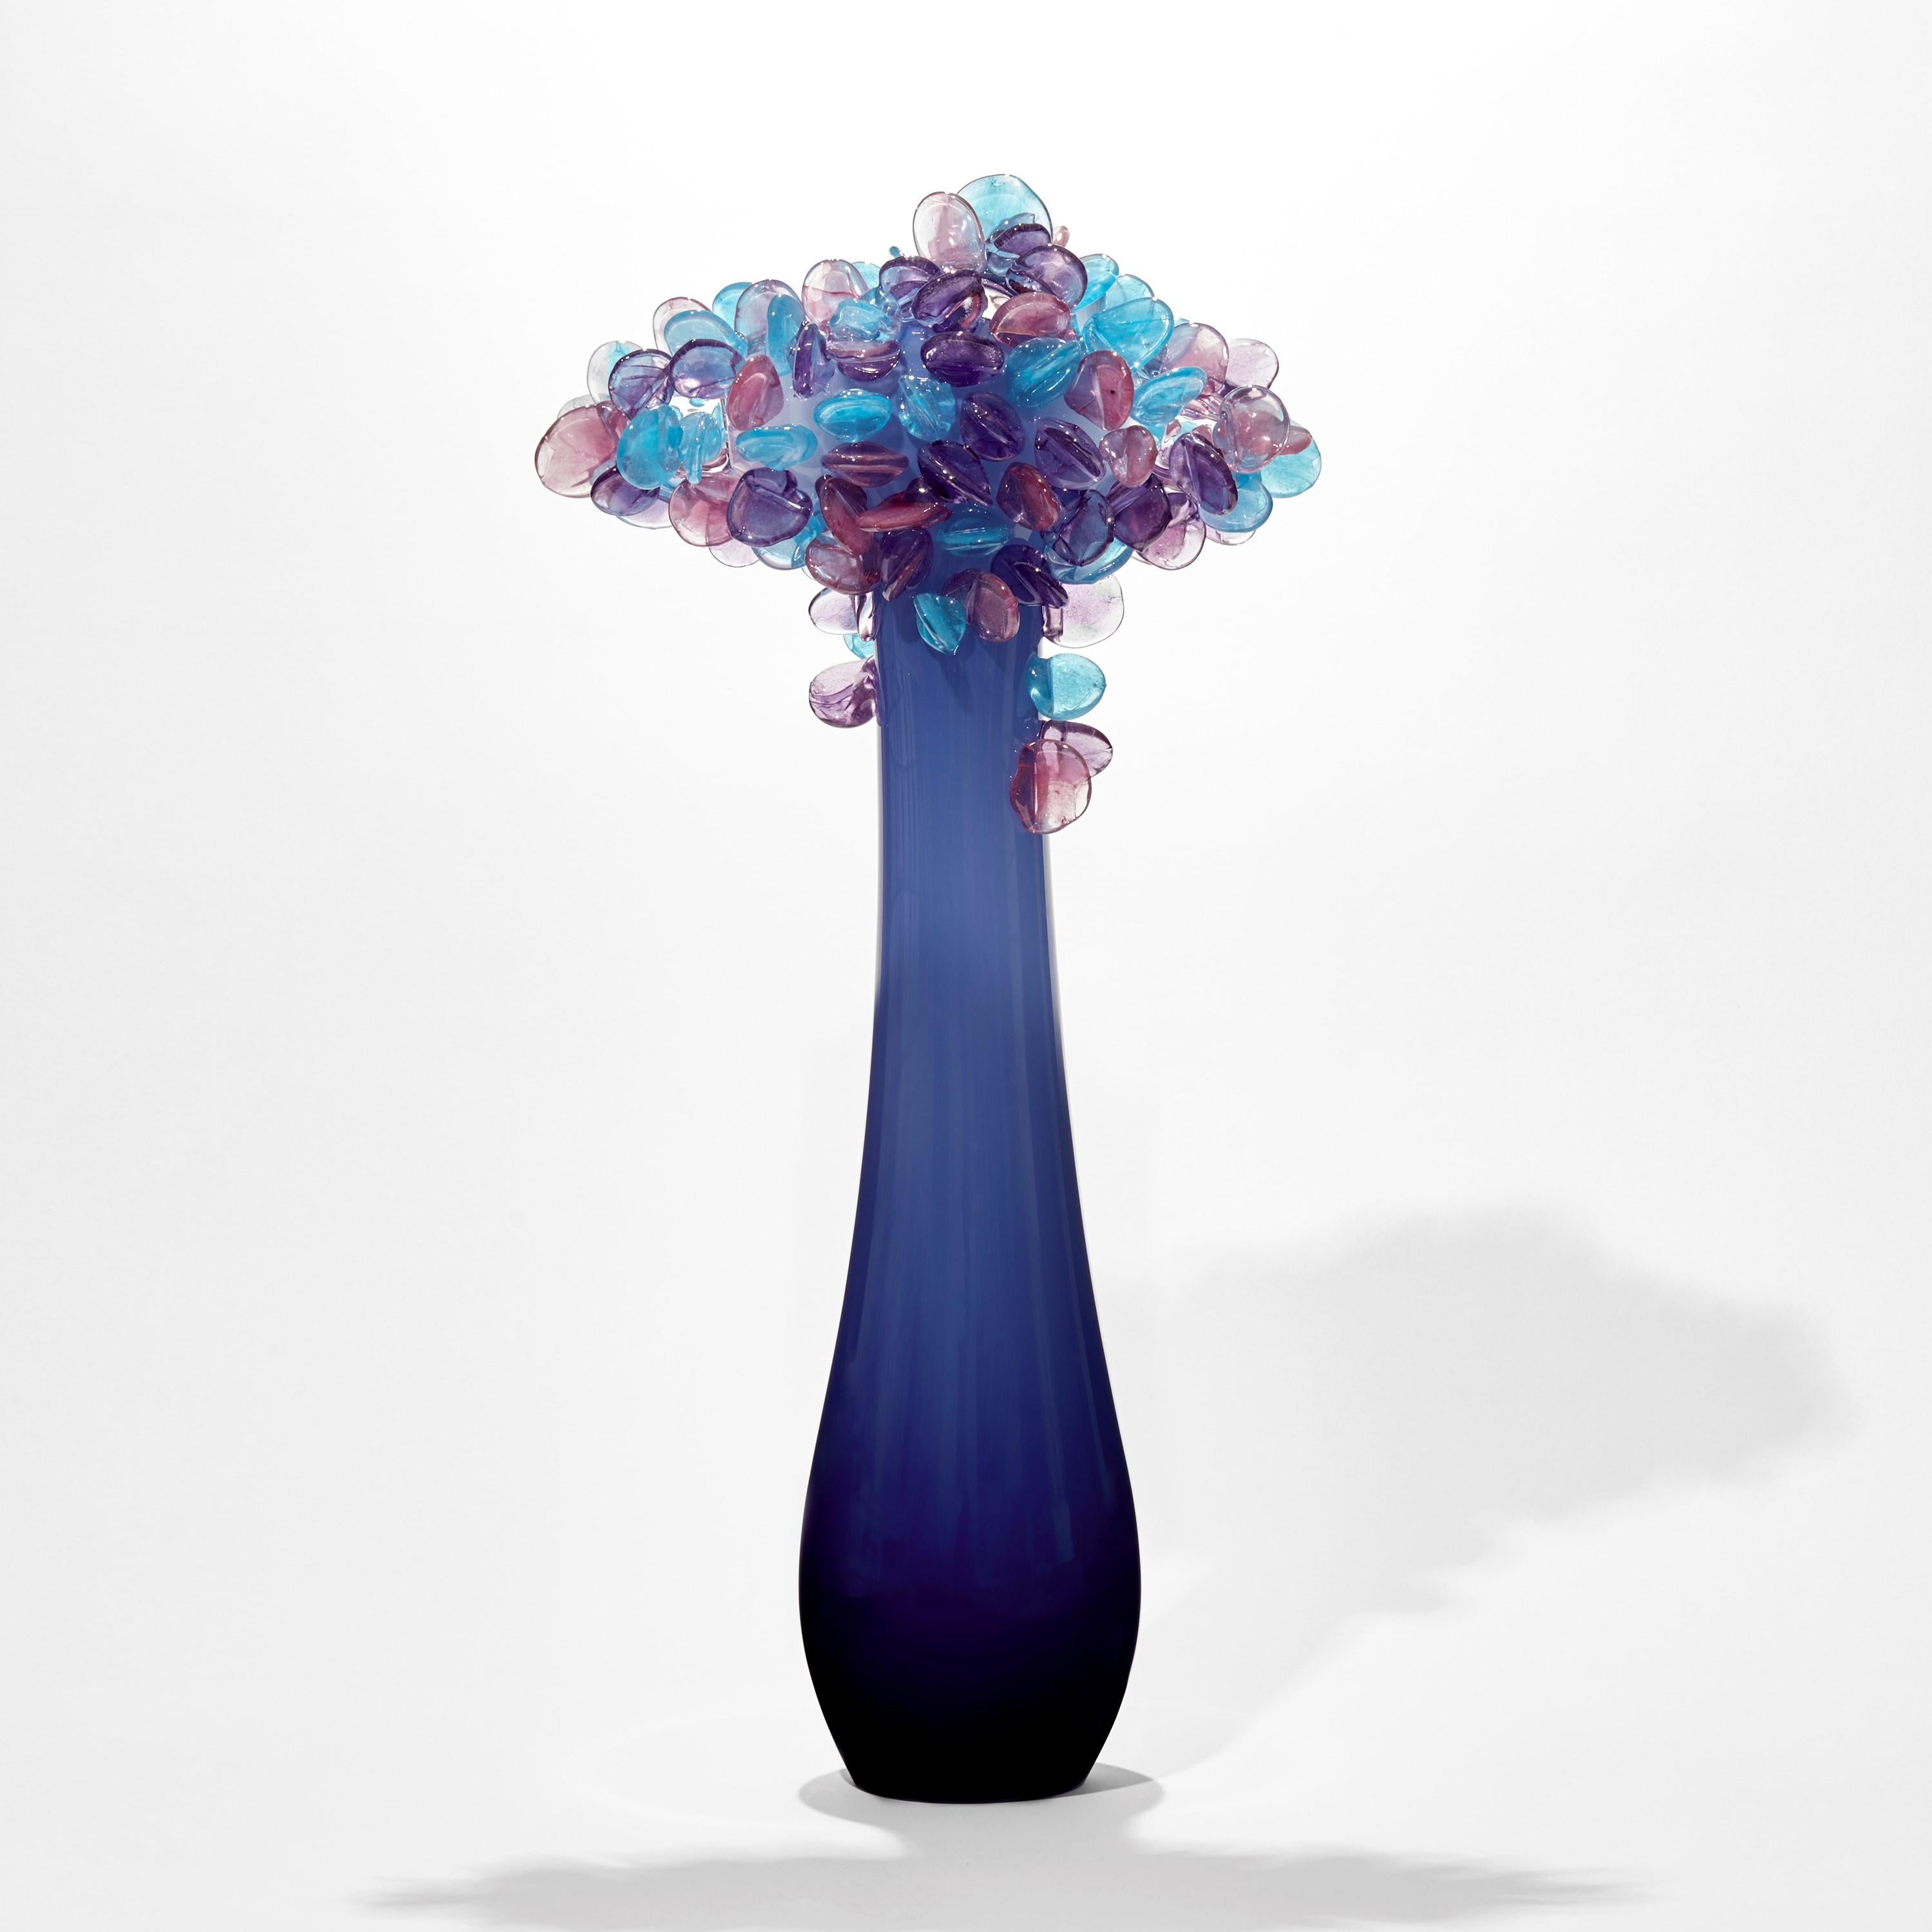 Organic Modern Enchanted Dawn in Iron Blue, a Unique Glass Tree Sculpture by Louis Thompson